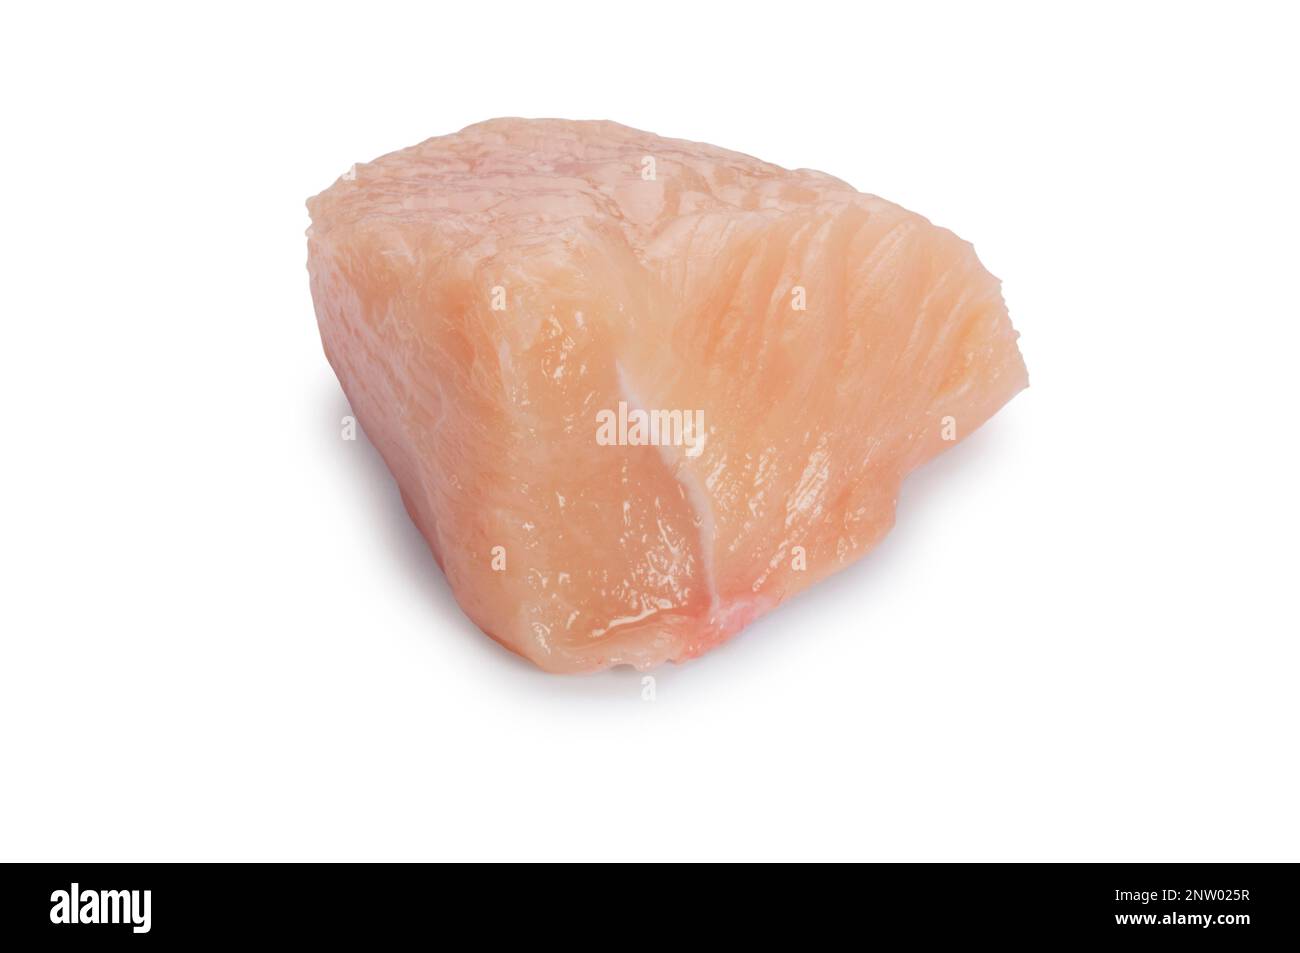 Studio shot of a piece of diced chicken cut out against a white background - John Gollop Stock Photo